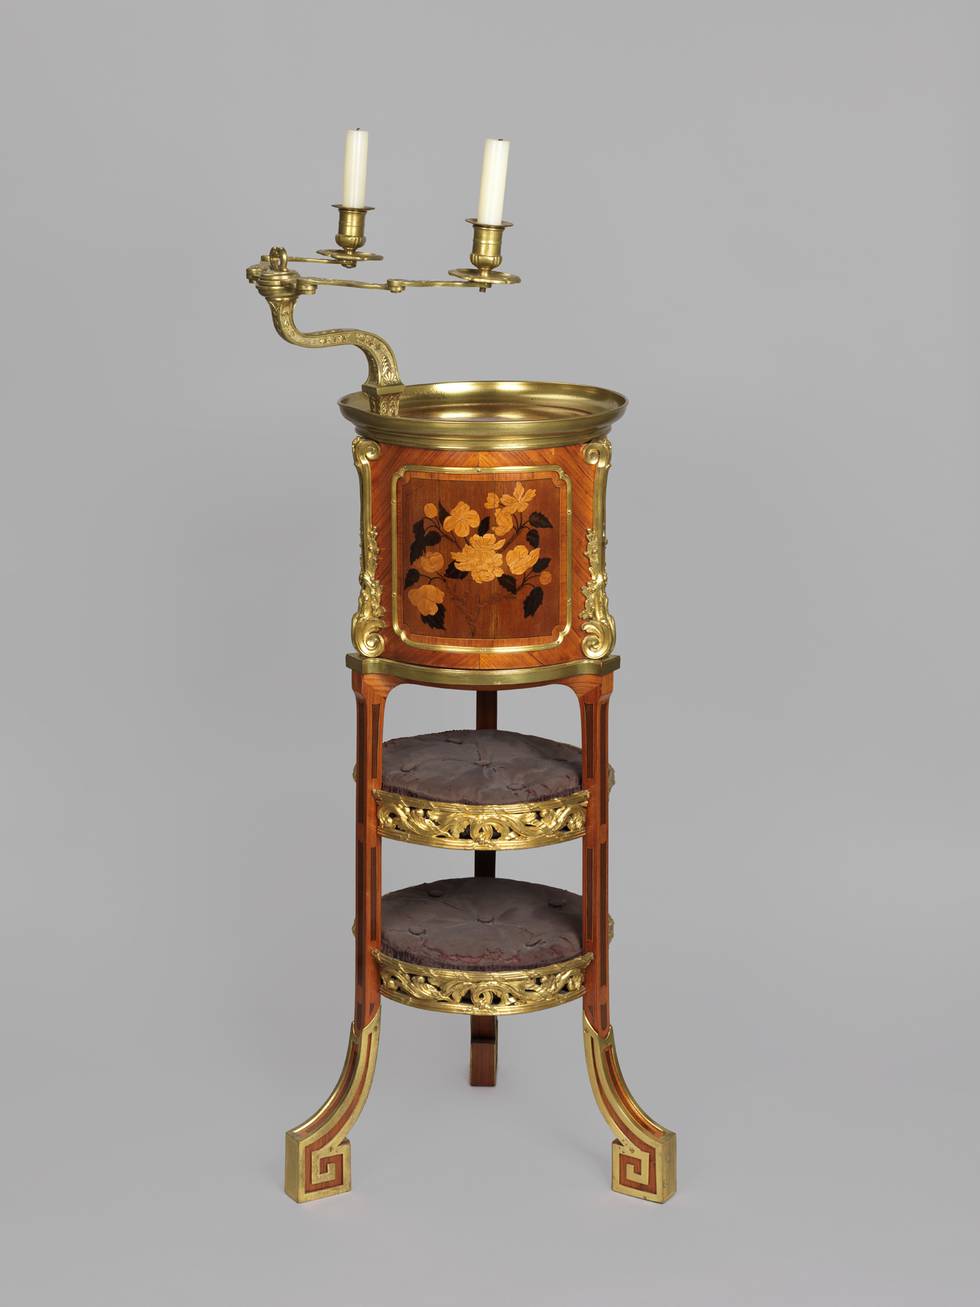 Photograph of an eighteenth-century work-table with candelabra